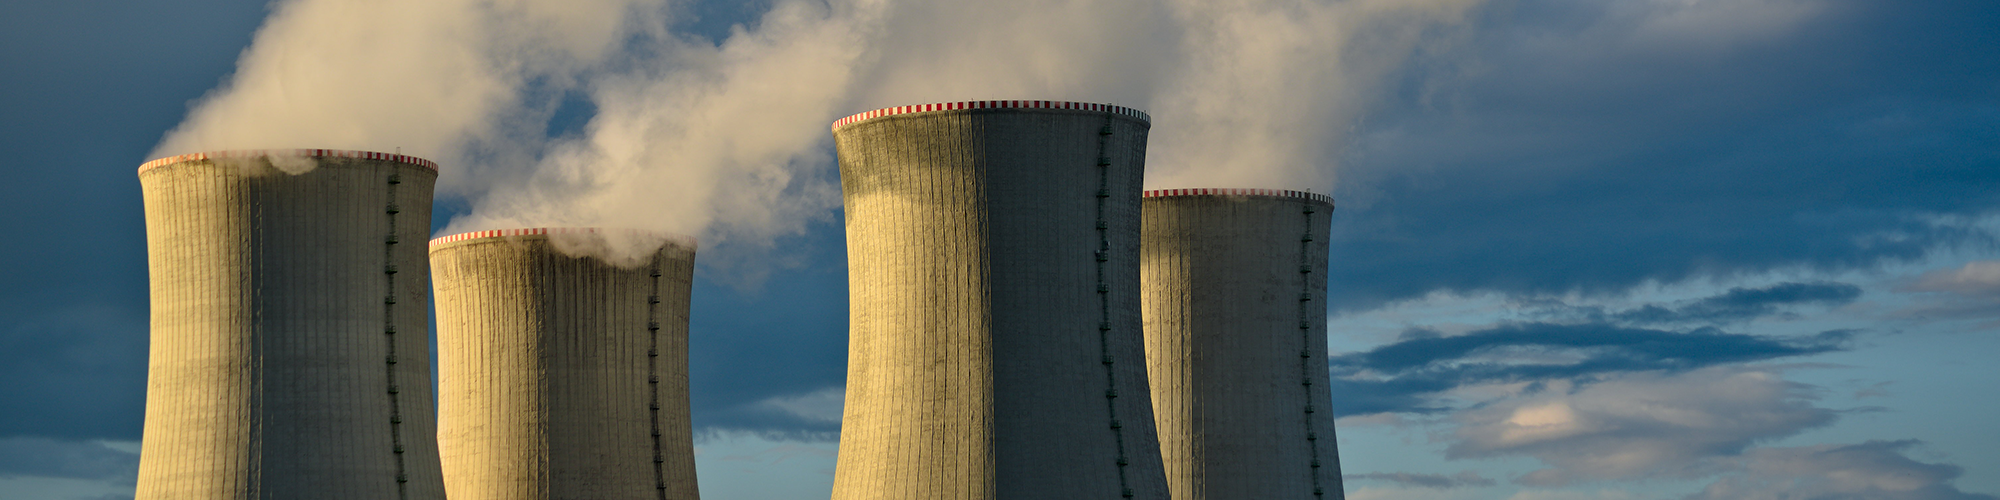 Thomas Nurcombe: The IPCC’s report shows how crucial nuclear energy will be to get to net zero.